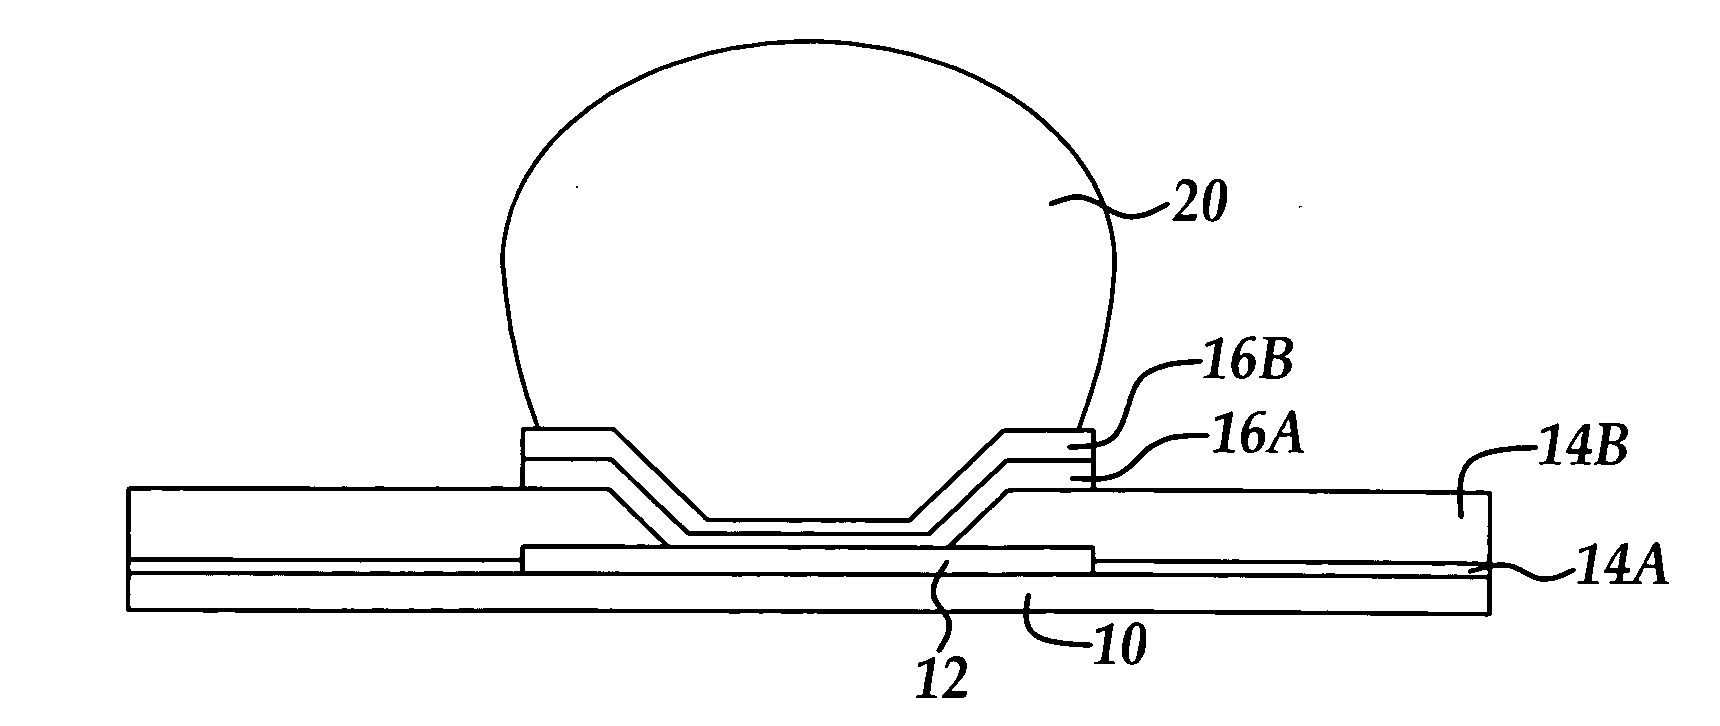 Method to prevent passivation layer peeling in a solder bump formation process